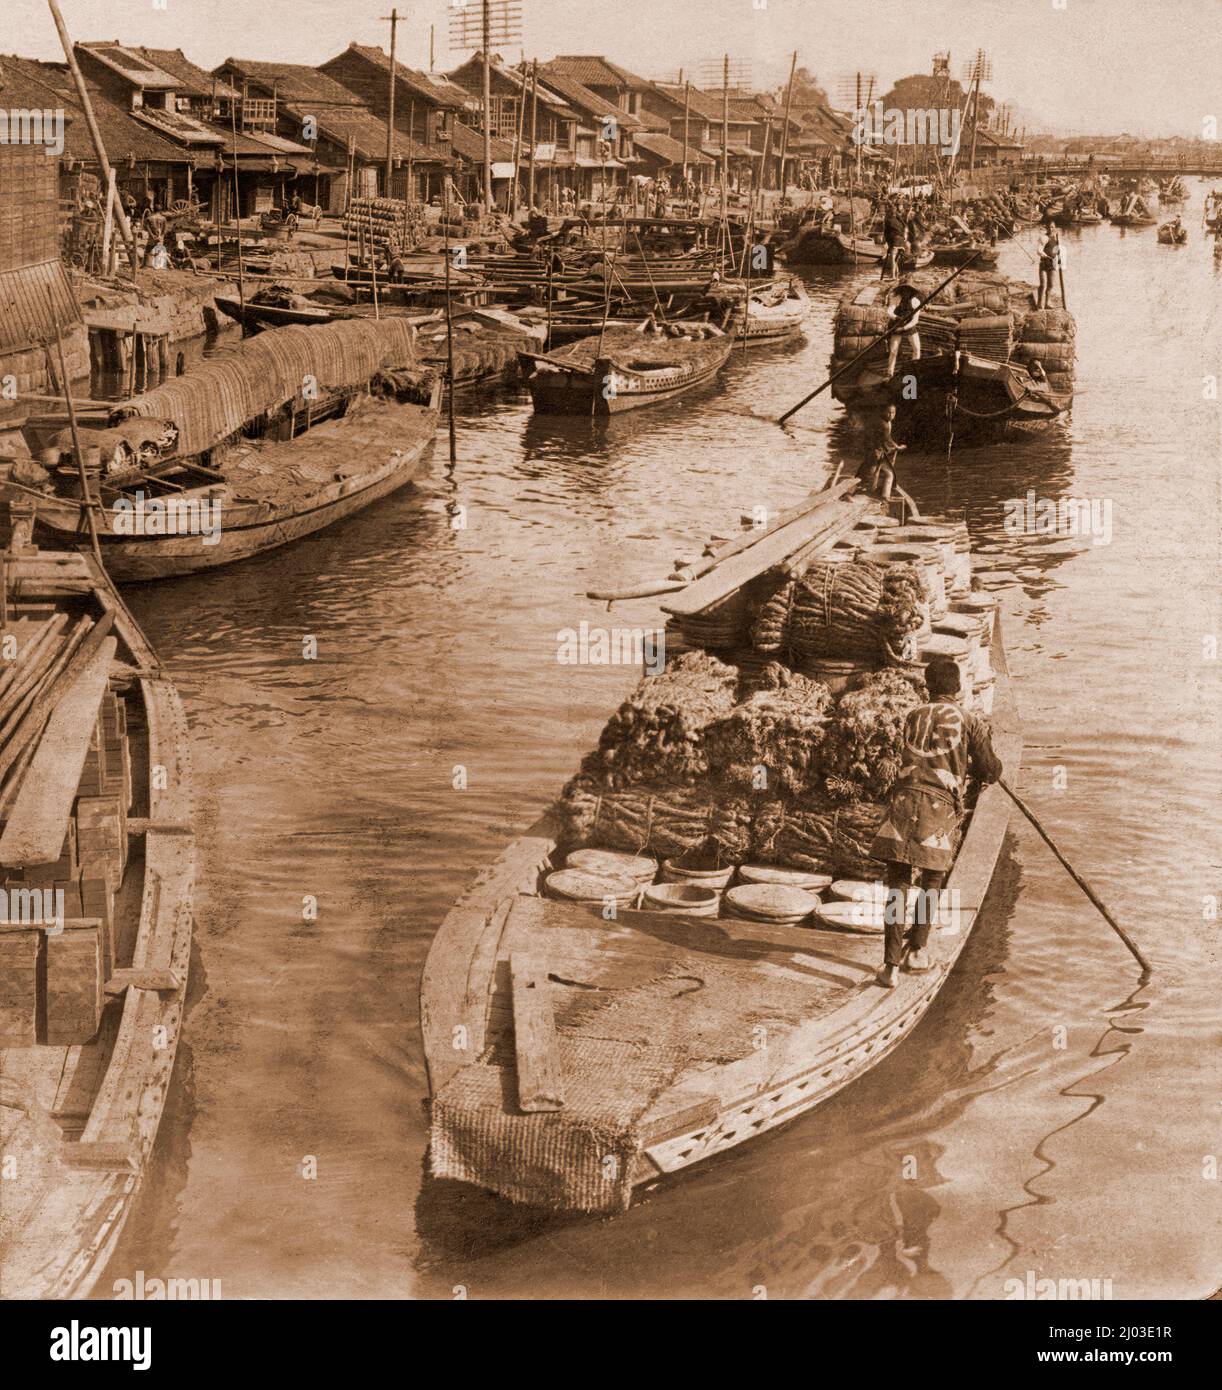 Canal in Tokyo with boats laden with food and moored alongside being poled along, Japan, about 1900 Stock Photo